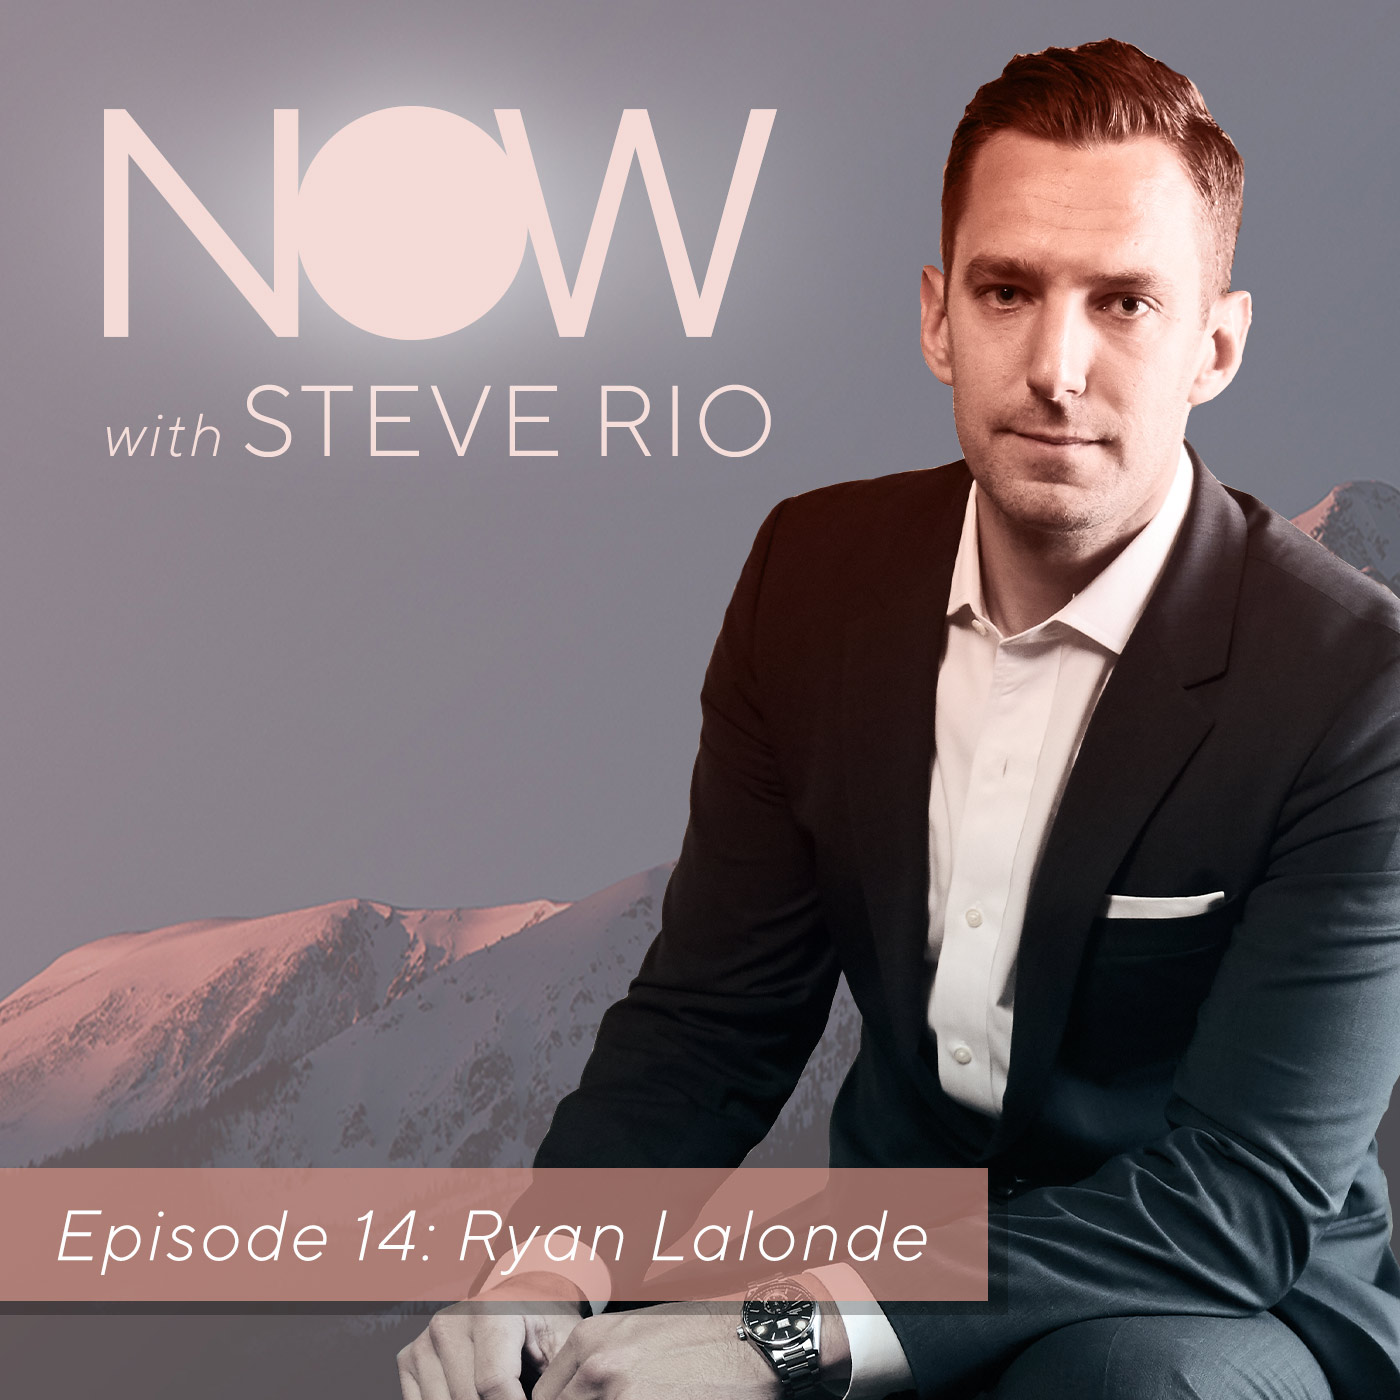 Ryan Lalonde on NOW with Steve Rio Podcast